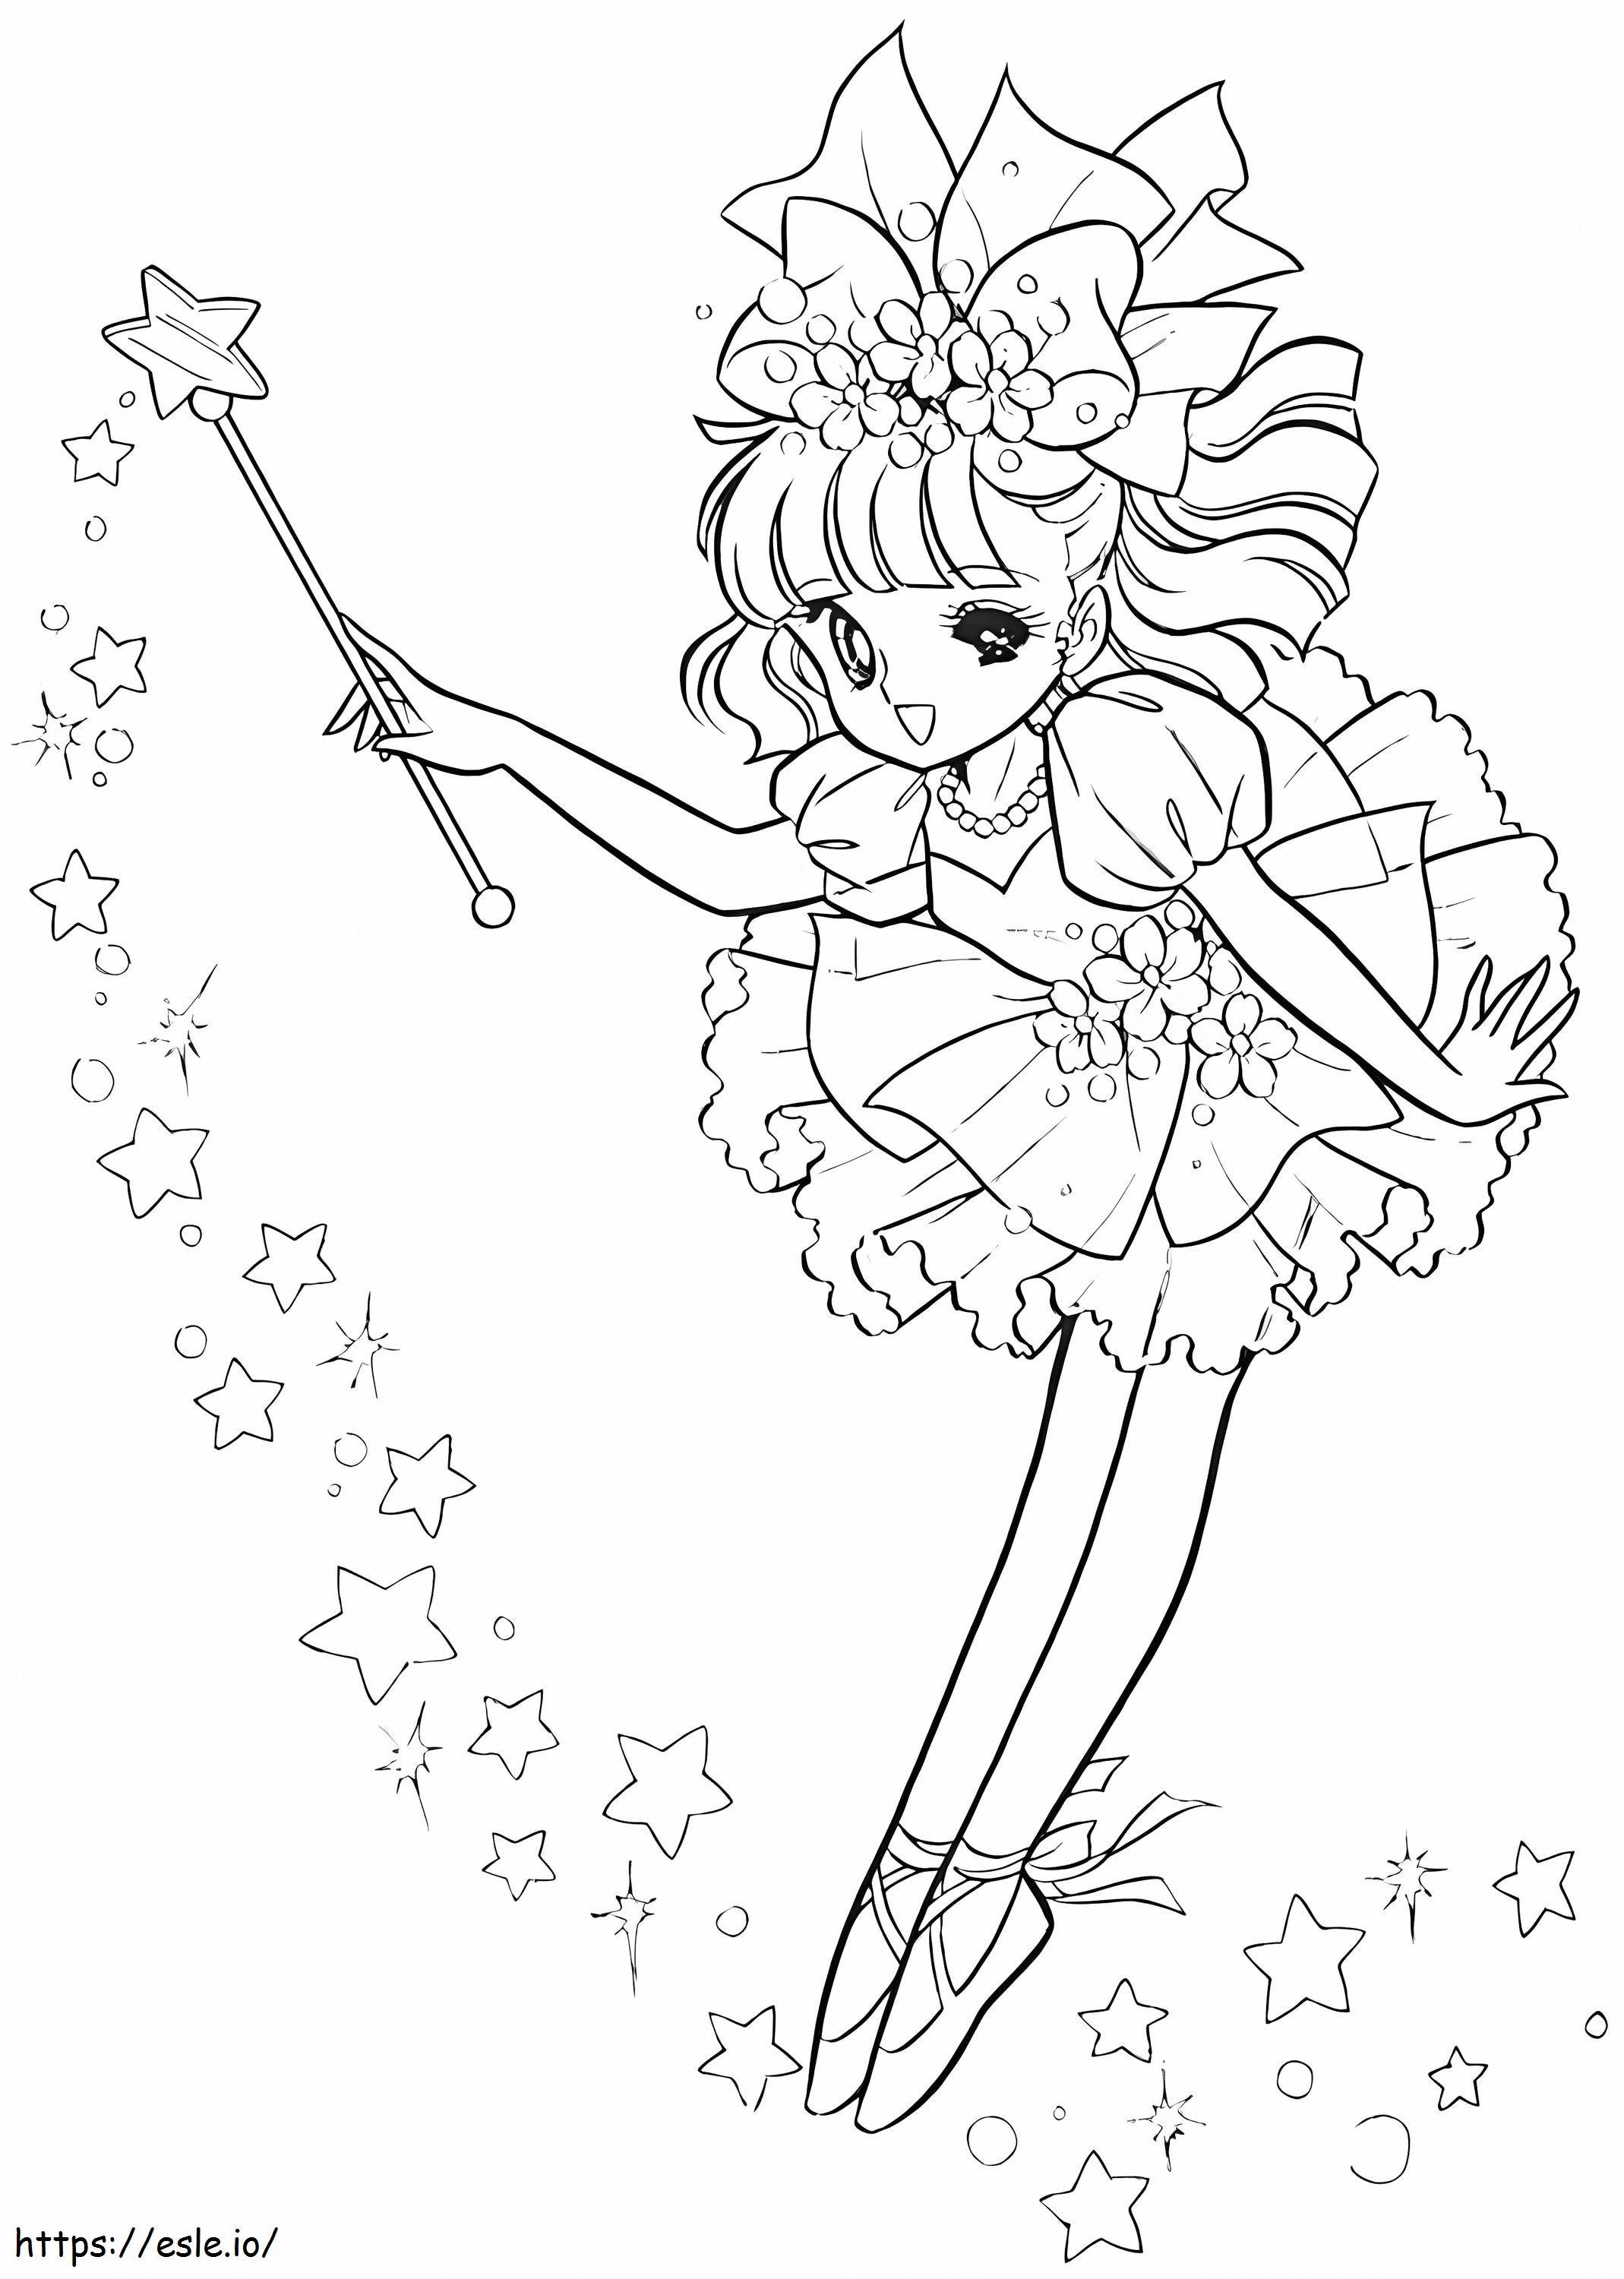 Anime Fairy Holding A Magic Wand coloring page